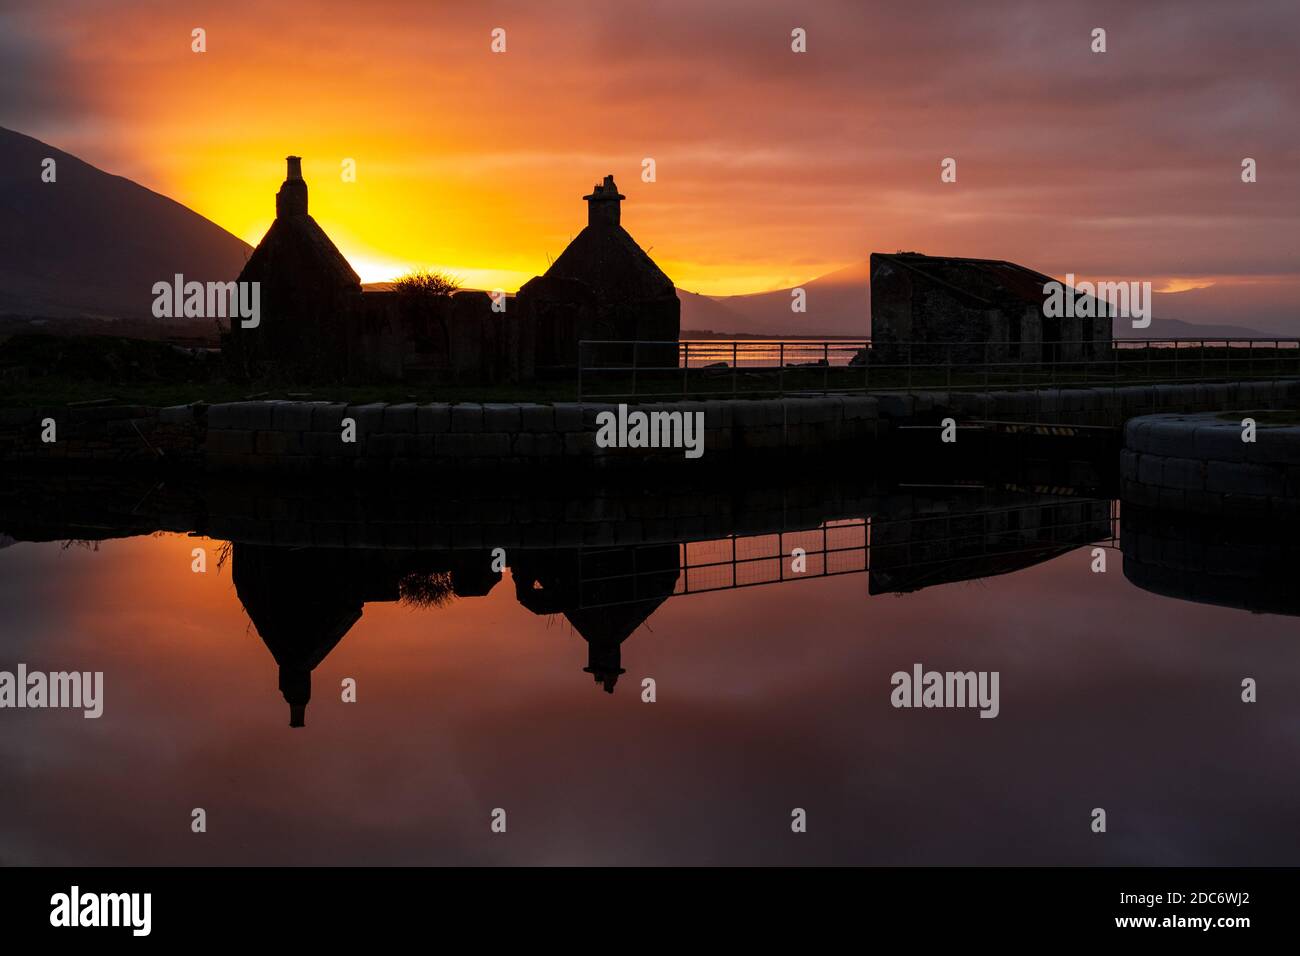 Reflection of Silhouette of Ruined Cottage and Shed in Canal Water at Sunset in Tralee, County Kerry, Ireland Stock Photo